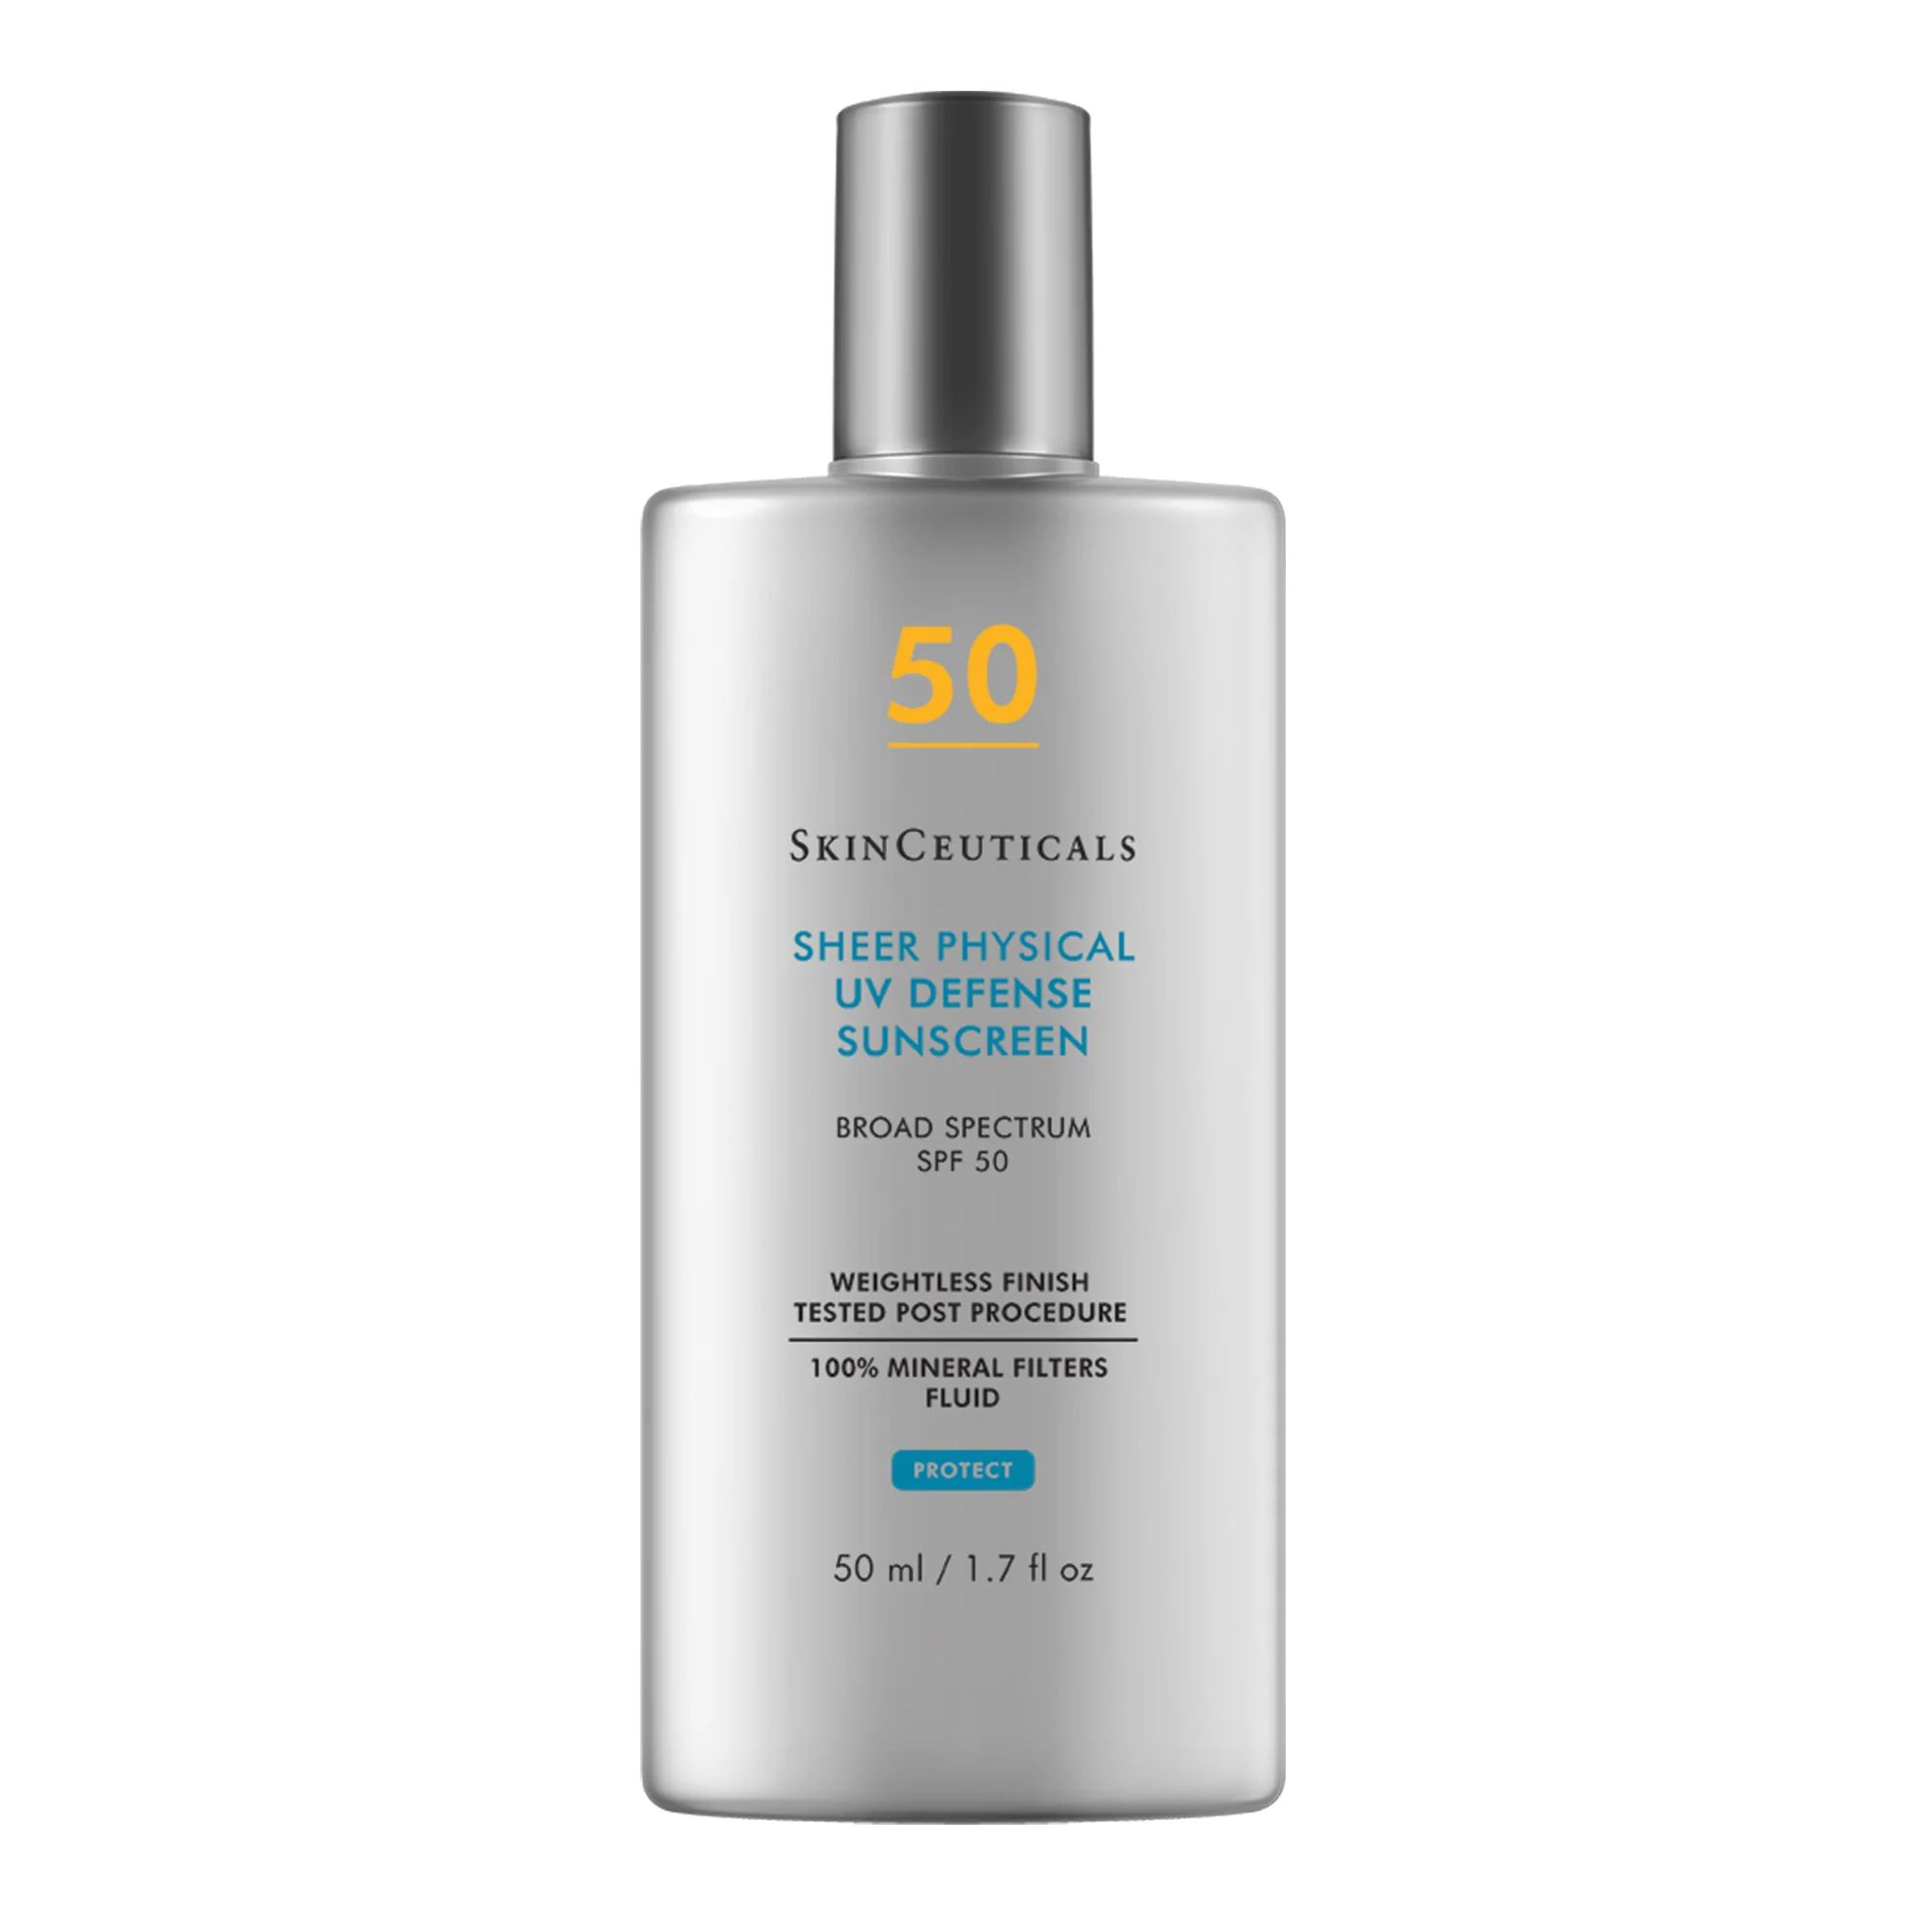 Sheer Physical UV Defense SPF 50 | Best Sunscreen for Face | SkinCeuticals | SkinCeuticals